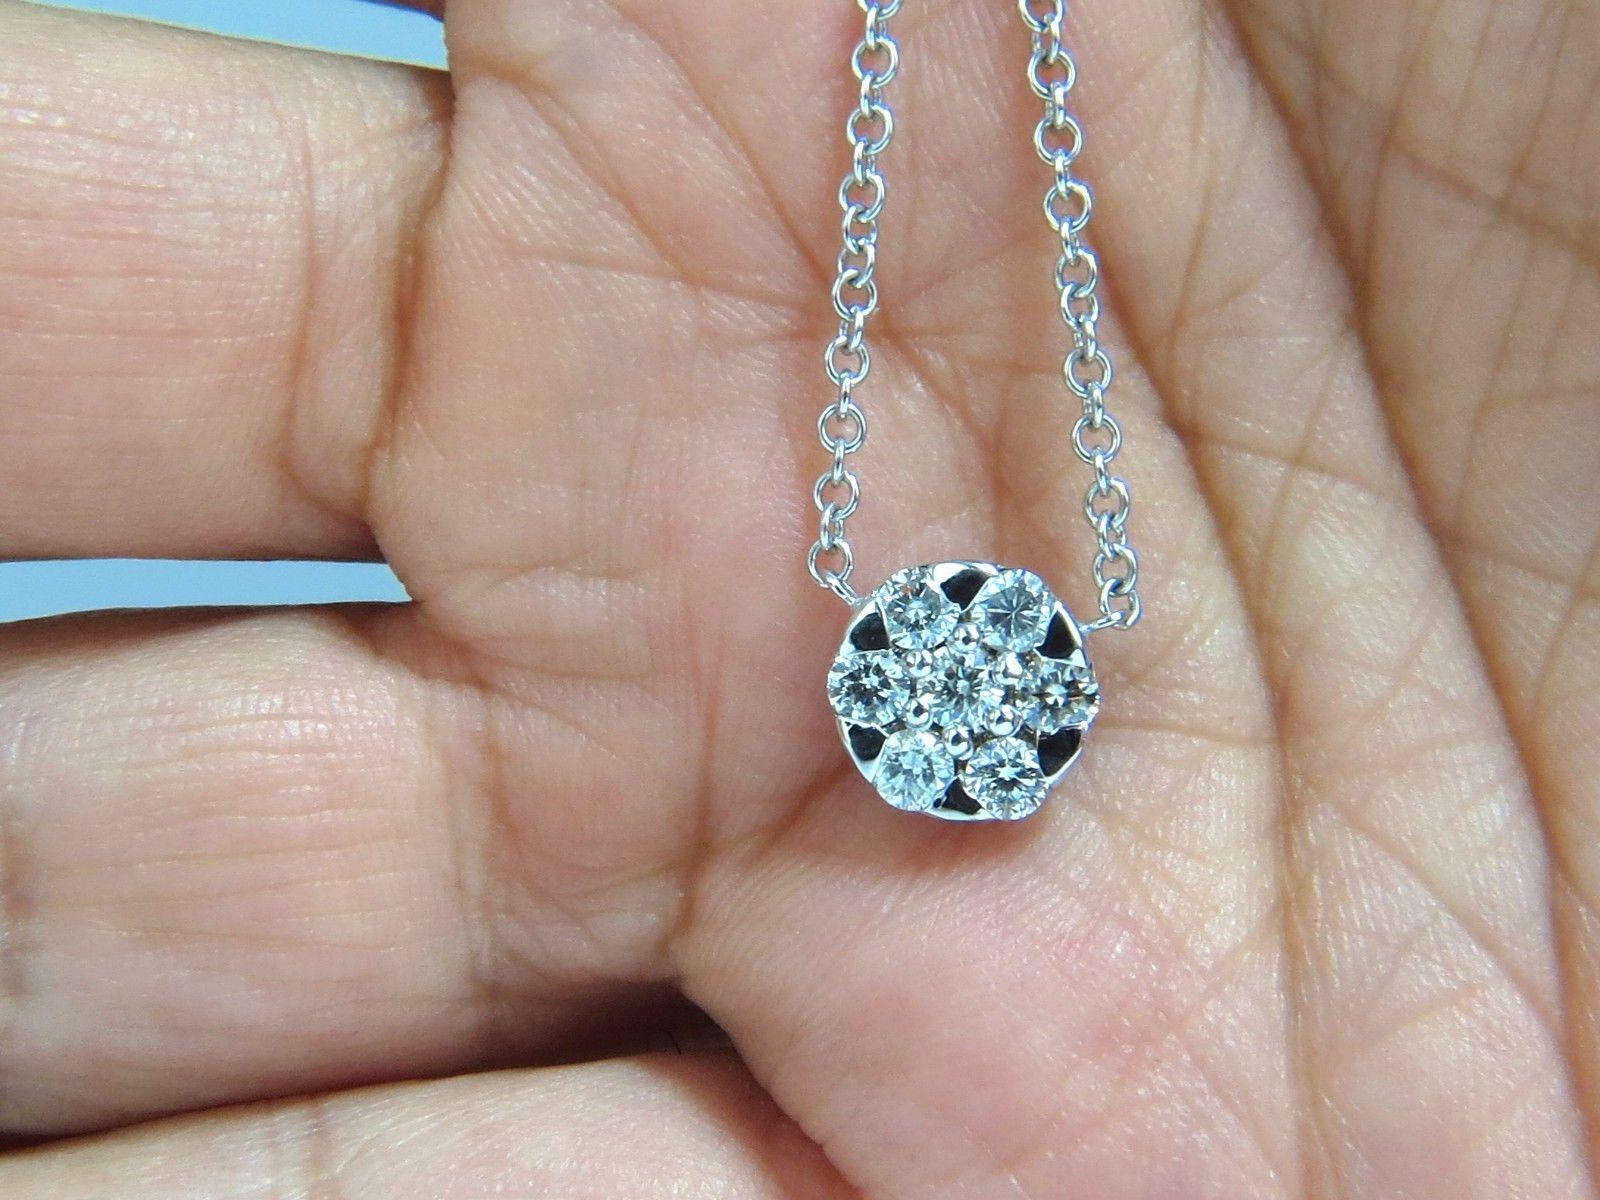 Aside from standard

 .70ct. Diamonds cluster necklace:

7 diamonds in cluster

All diamonds: full cut & rounds

H color,  Si-2 clarity.

14kt. white gold. 

4.6 grams

Diameter: .37 inch

16 inches long.

please see all photos 

$3500 Appraisal